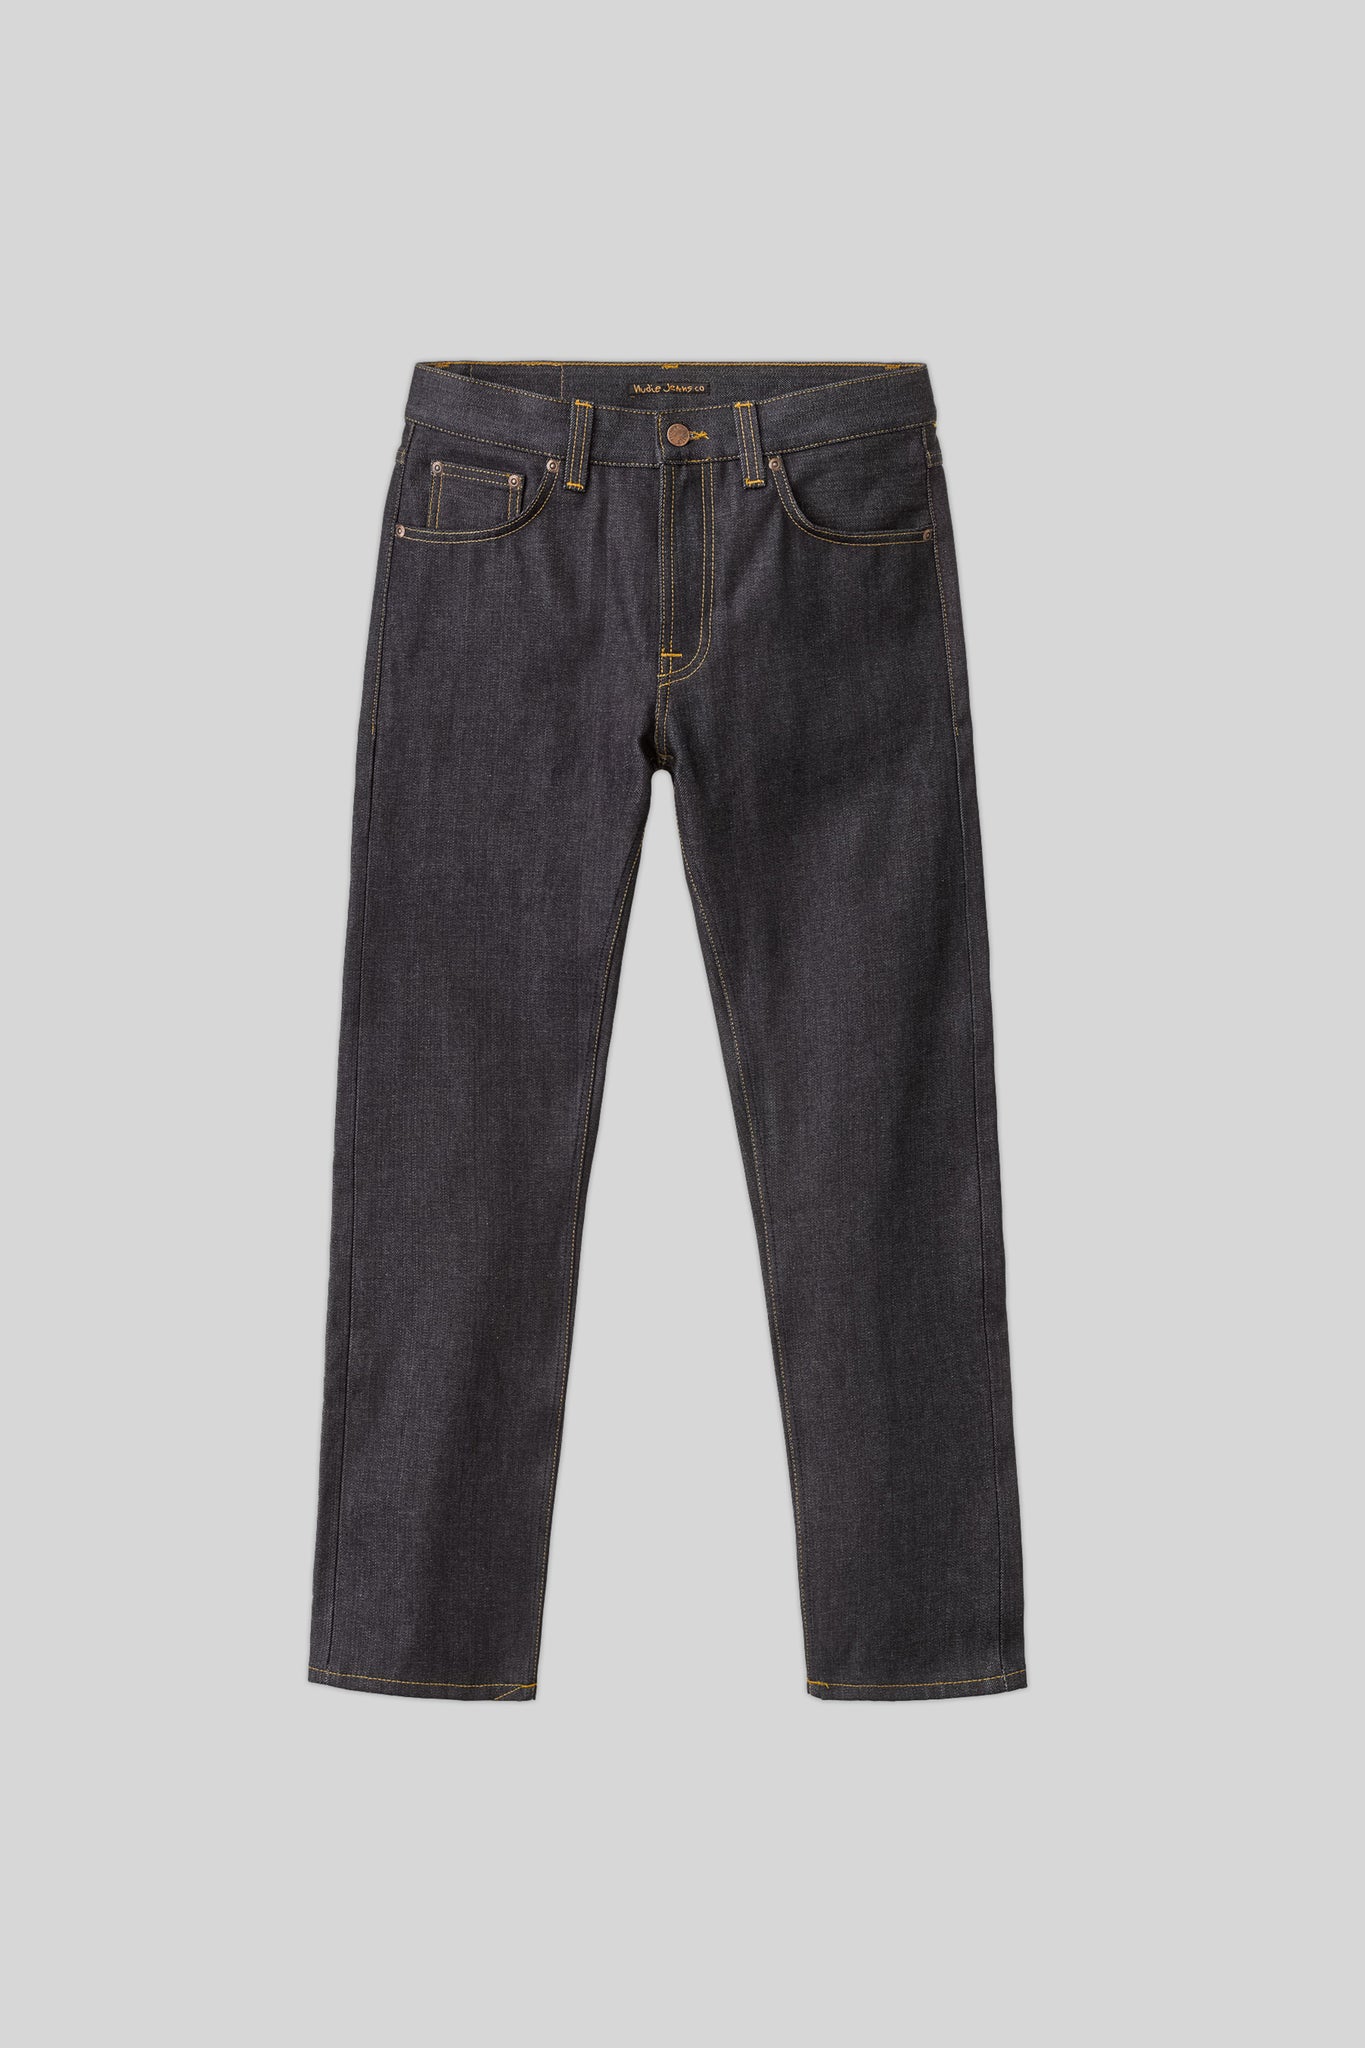 Gritty Jackson Dry Classic Navy